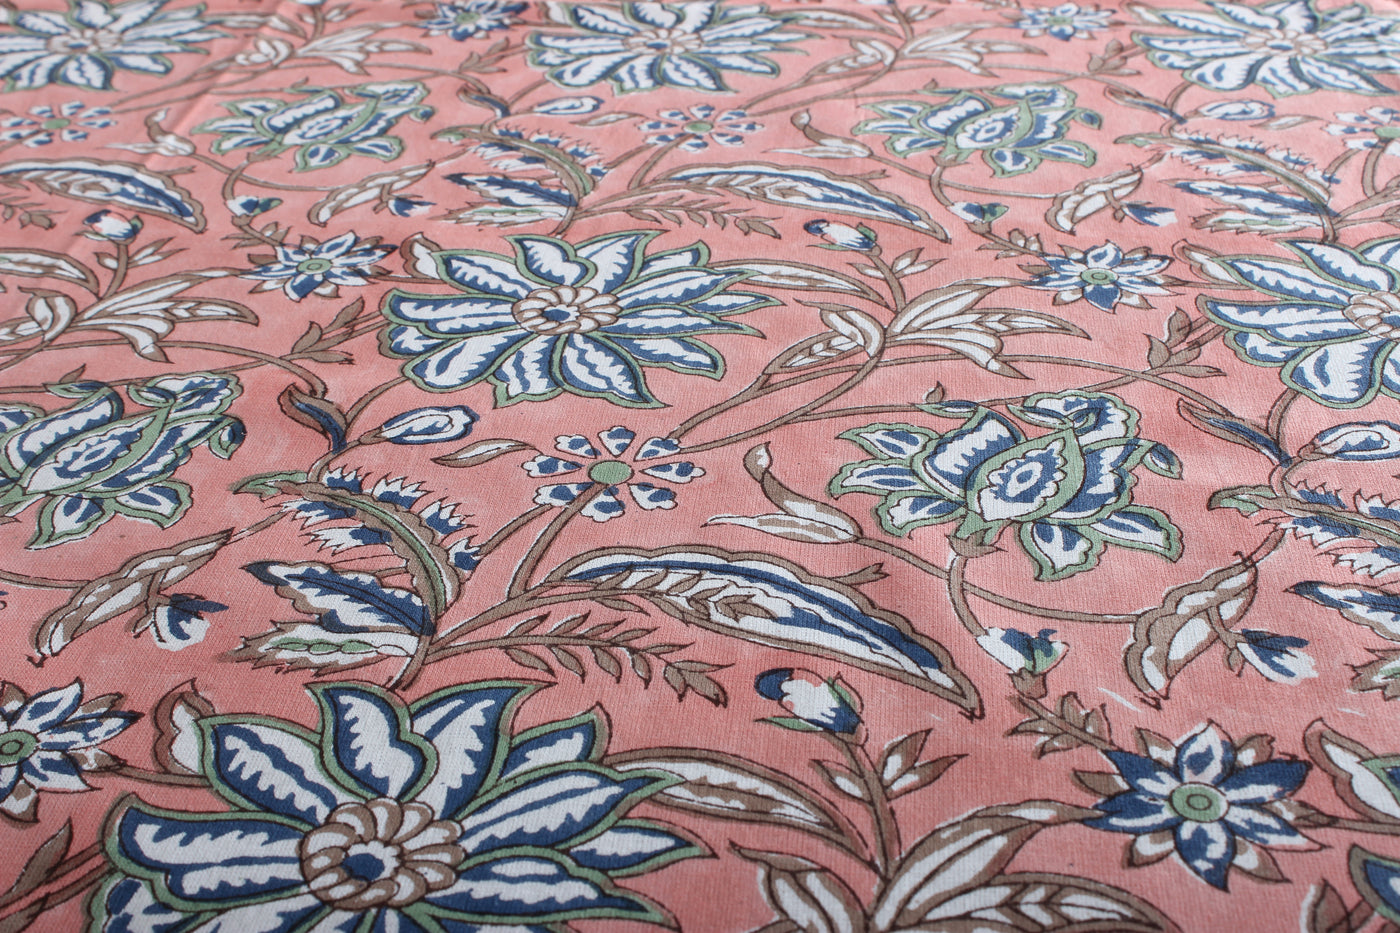 Fabricrush Peach and Berry Blue 72X140 Inches Rectangle 100% Cotton Hand Block Print Tablecloth Washable Halloween Thanksgiving/Christmas Parties/Wedding Use,Fall décor Farmhouse Dining Dinner Tablecloth